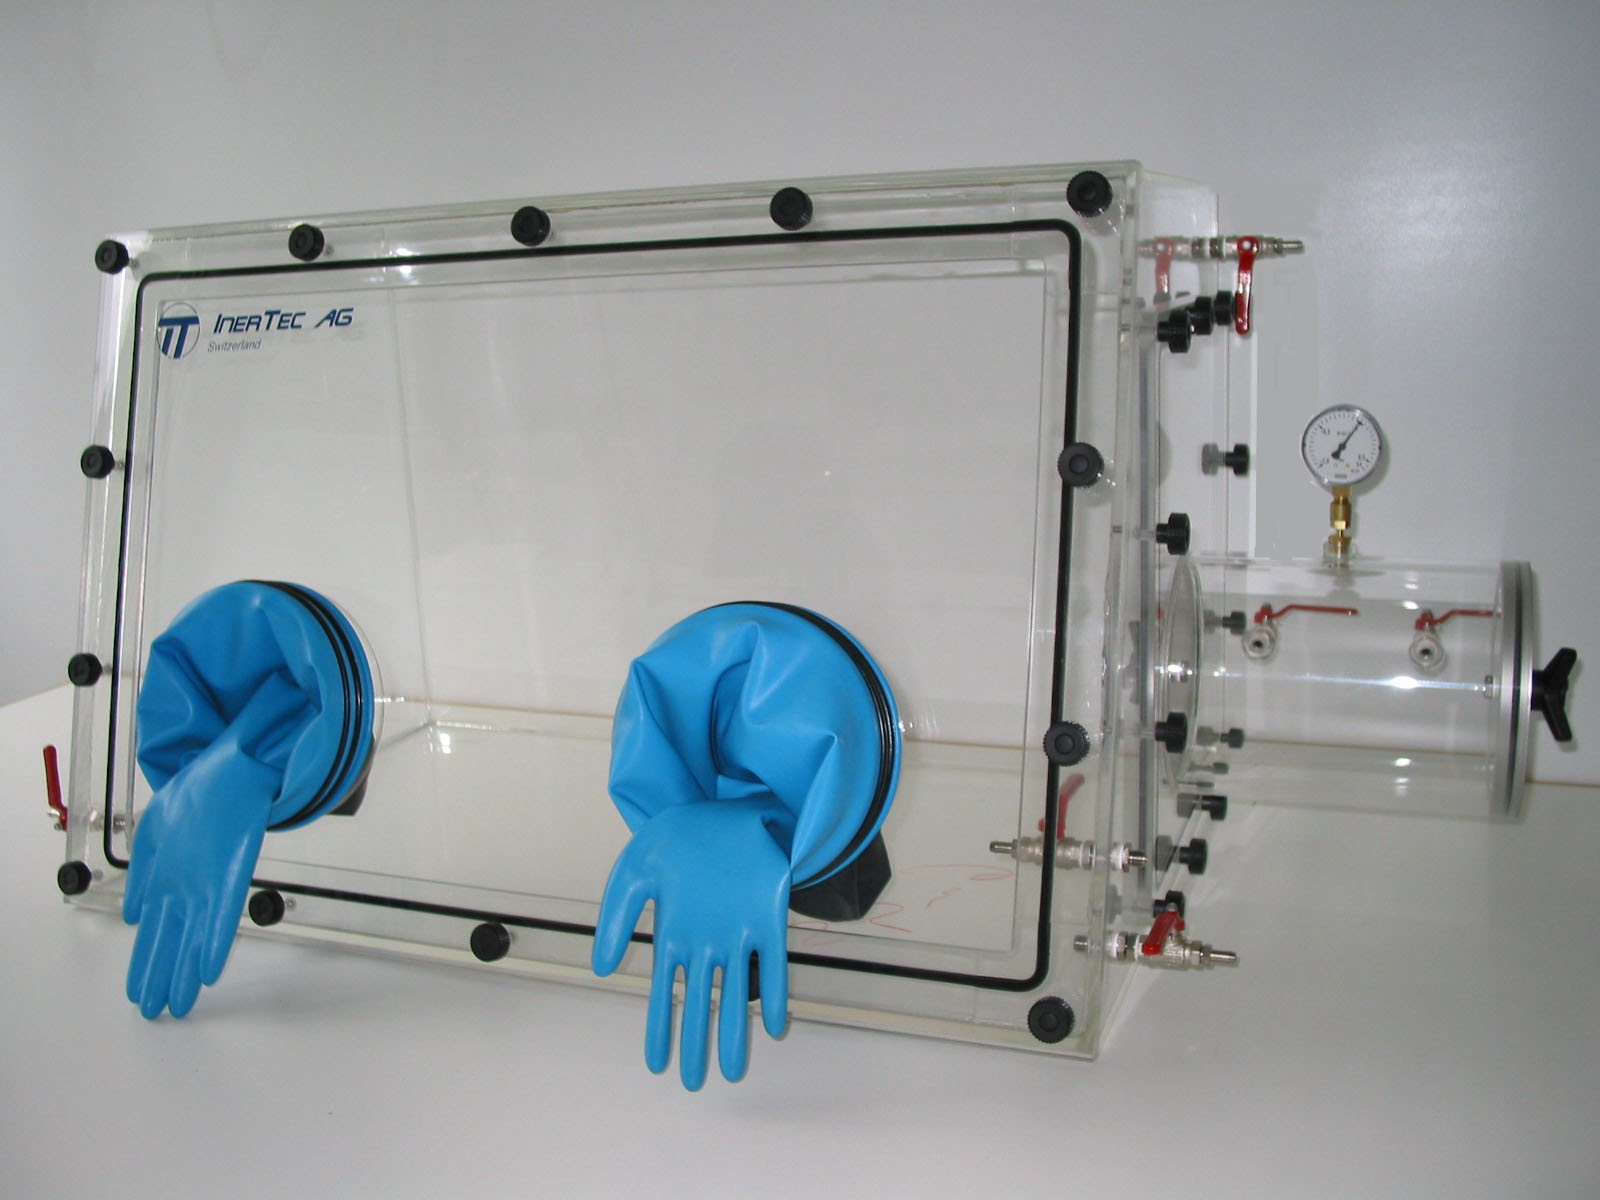 Glovebox made of acrylic&gt; Gas filling: automatic flushing with pressure control, front version: standard, side version: removable flange Control: humidity regulator and oxygen display with data logger